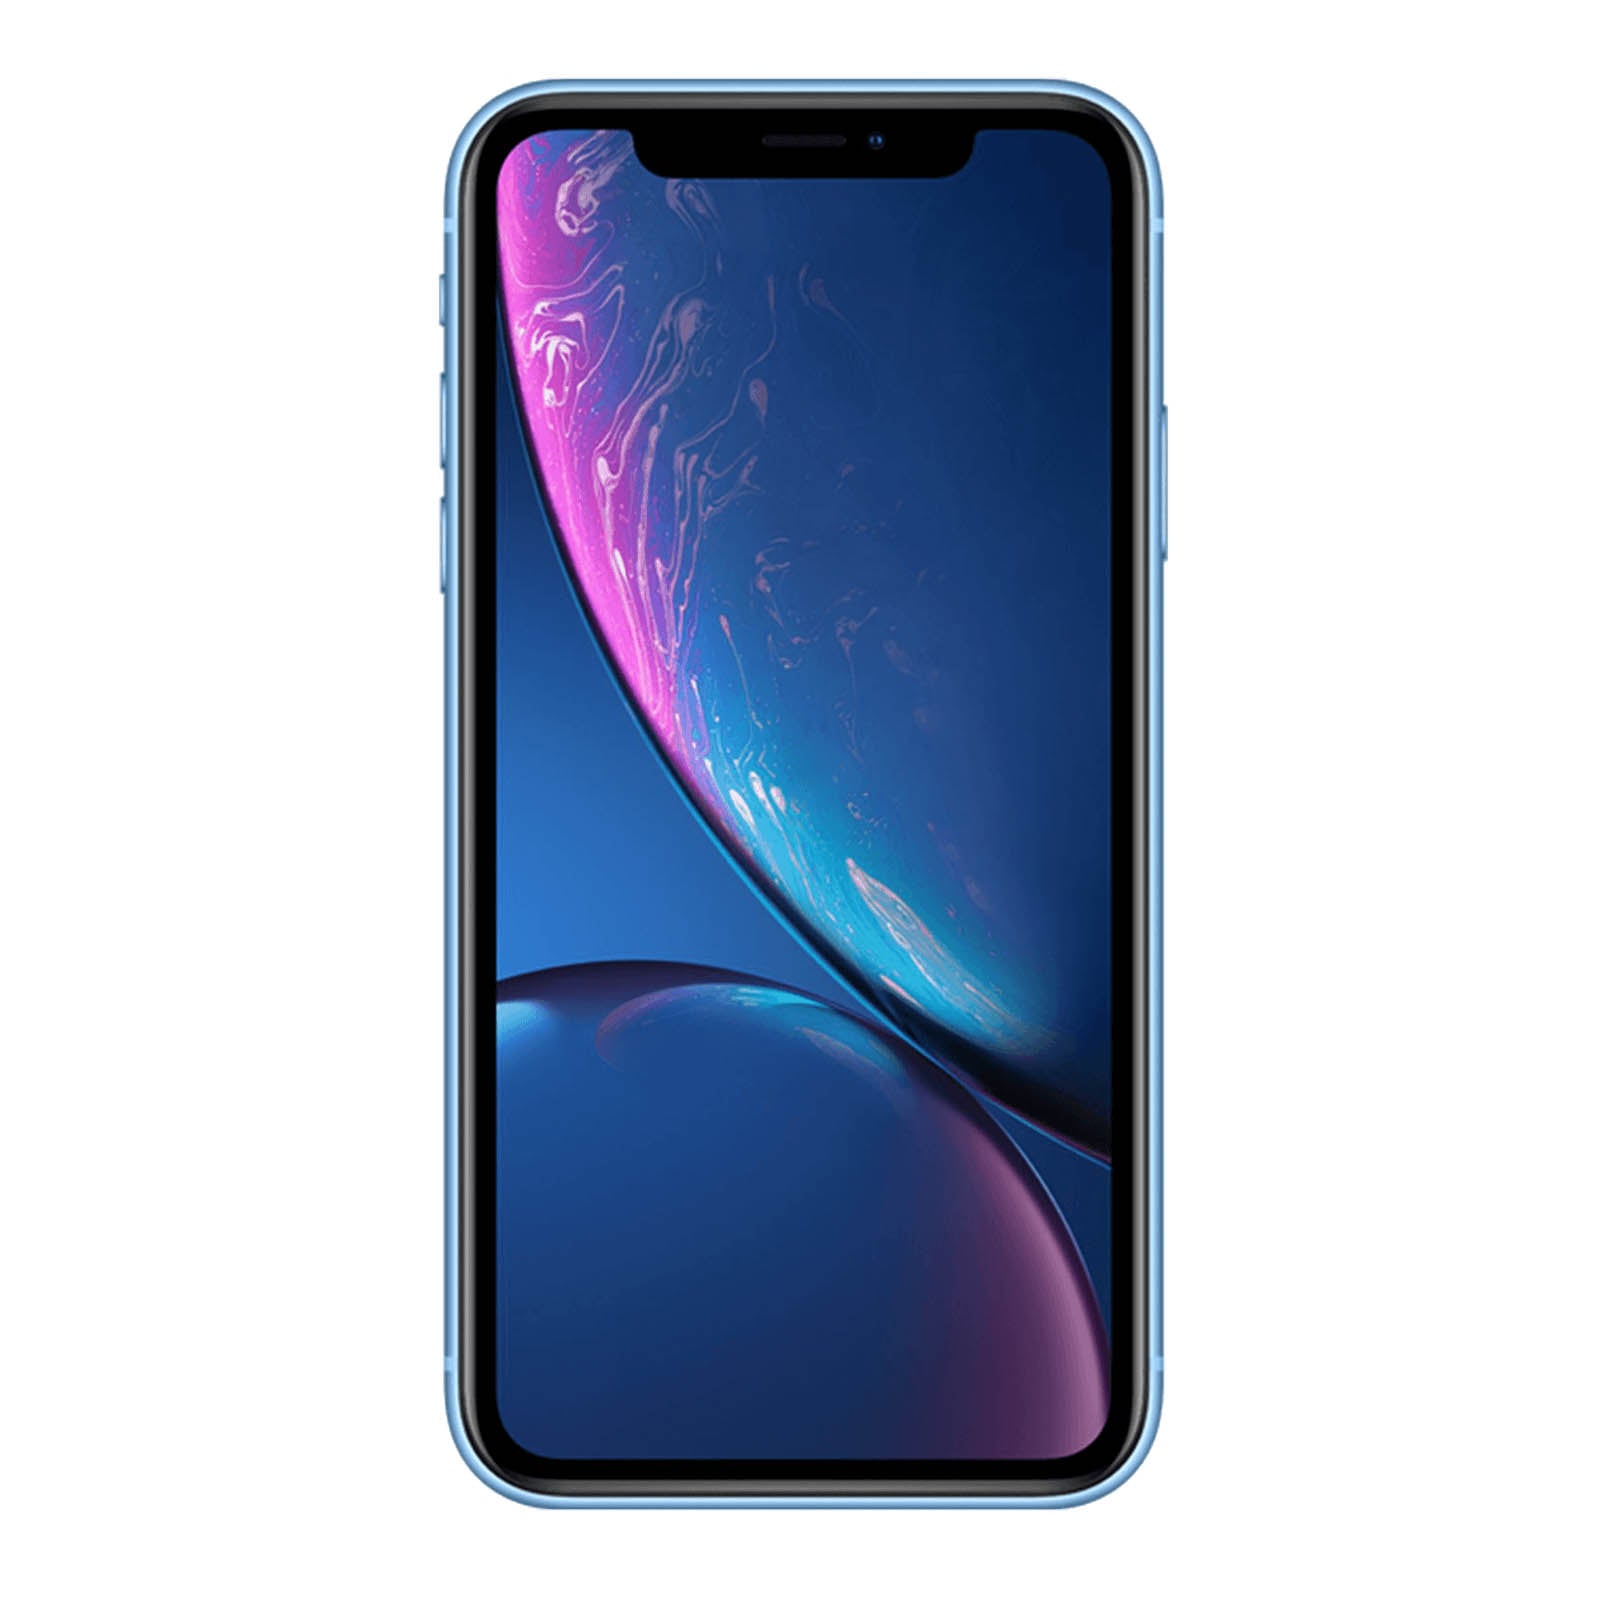 Apple iPhone XR 256GB Blue Good - T-Mobile